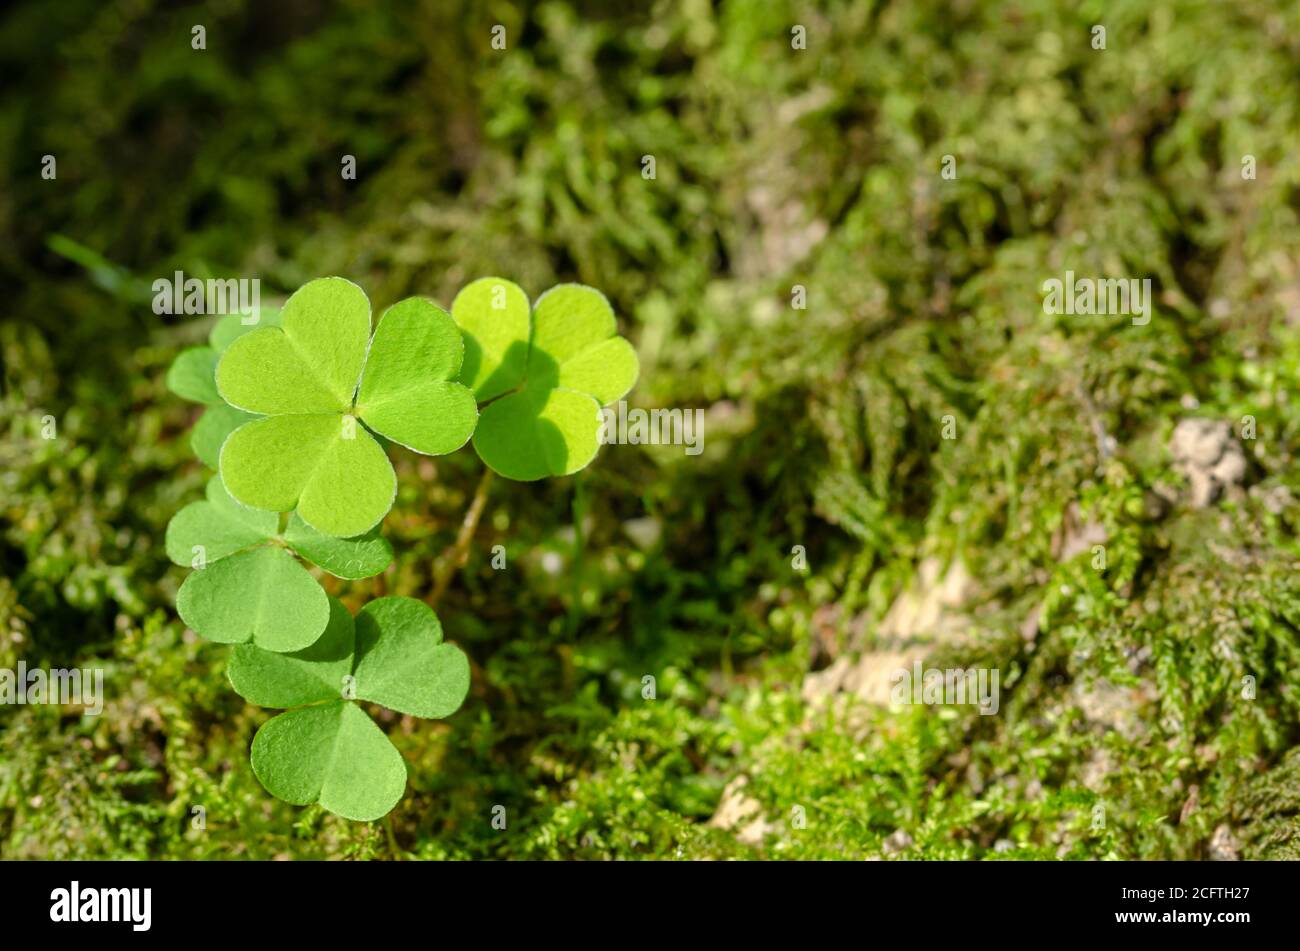 Common wood sorrel, growing on a mossy forest floor, on a sunny summer day. Oxalis acetosella, sometimes referred to a shamrock and given as a gift. Stock Photo